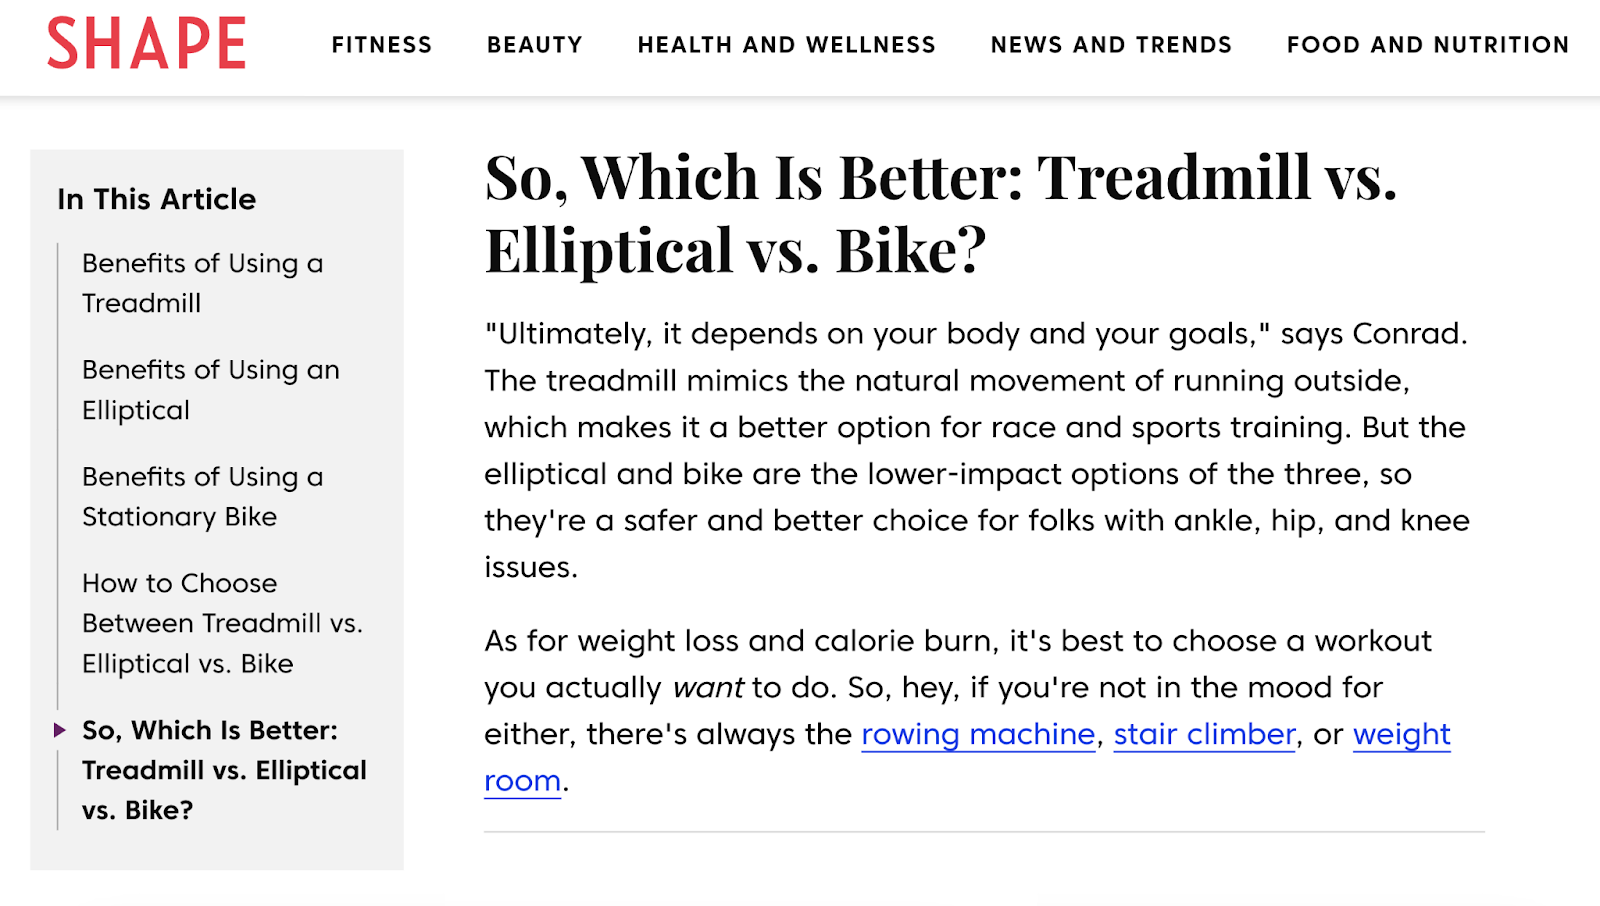 Shape's article conclusion titled: "So, Which Is Better: Treadmill vs. Elliptical vs. Bike?"